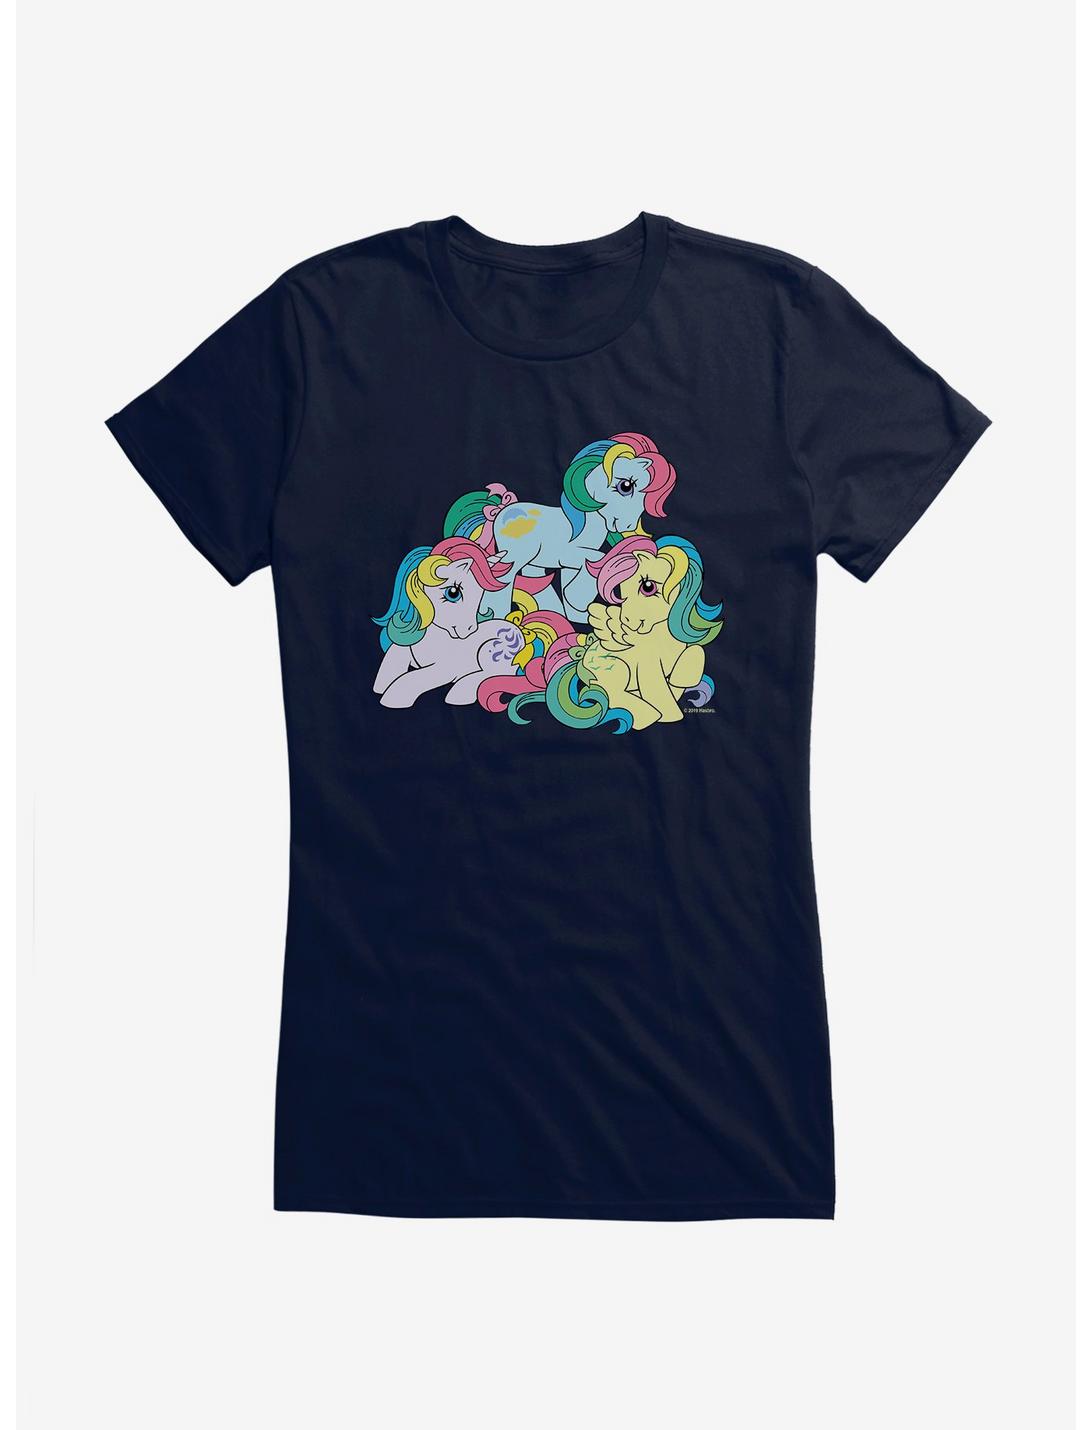 My Little Pony Forever Friends Girls T-Shirt, NAVY, hi-res